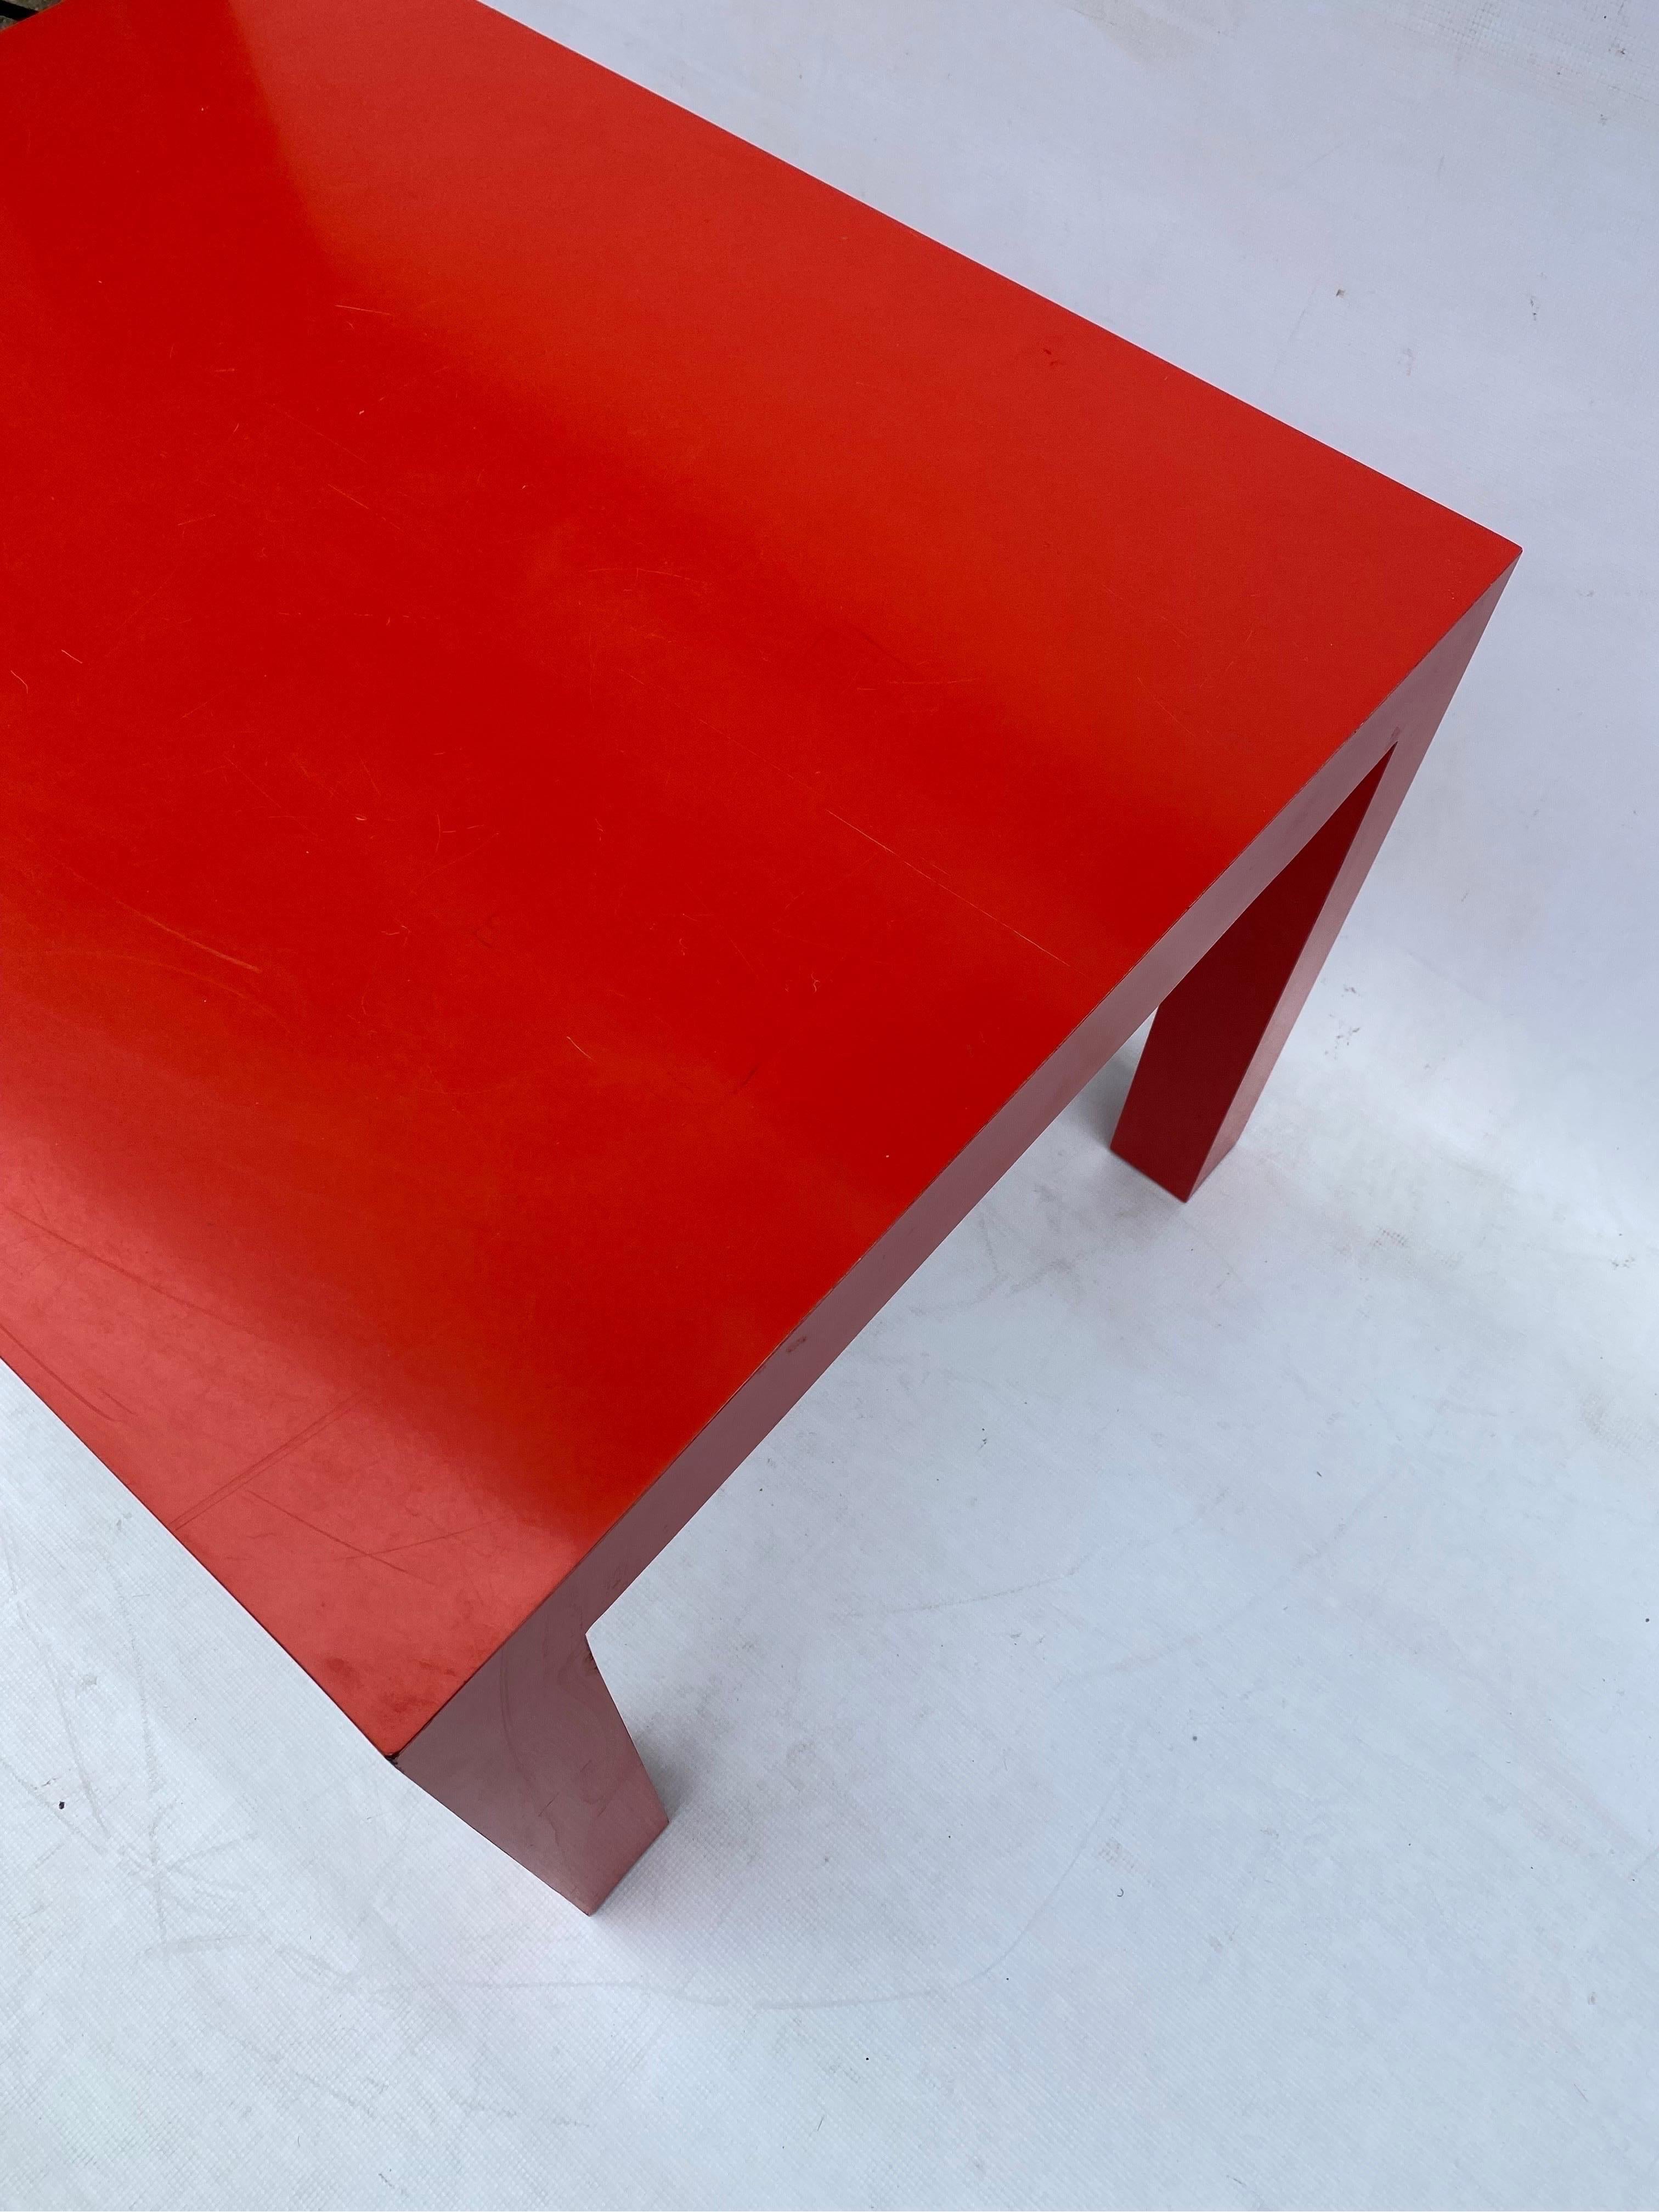 Milo Baughman for Thayer Coggin Formica Red Side Coffee Table 1960s Mid Century  For Sale 3